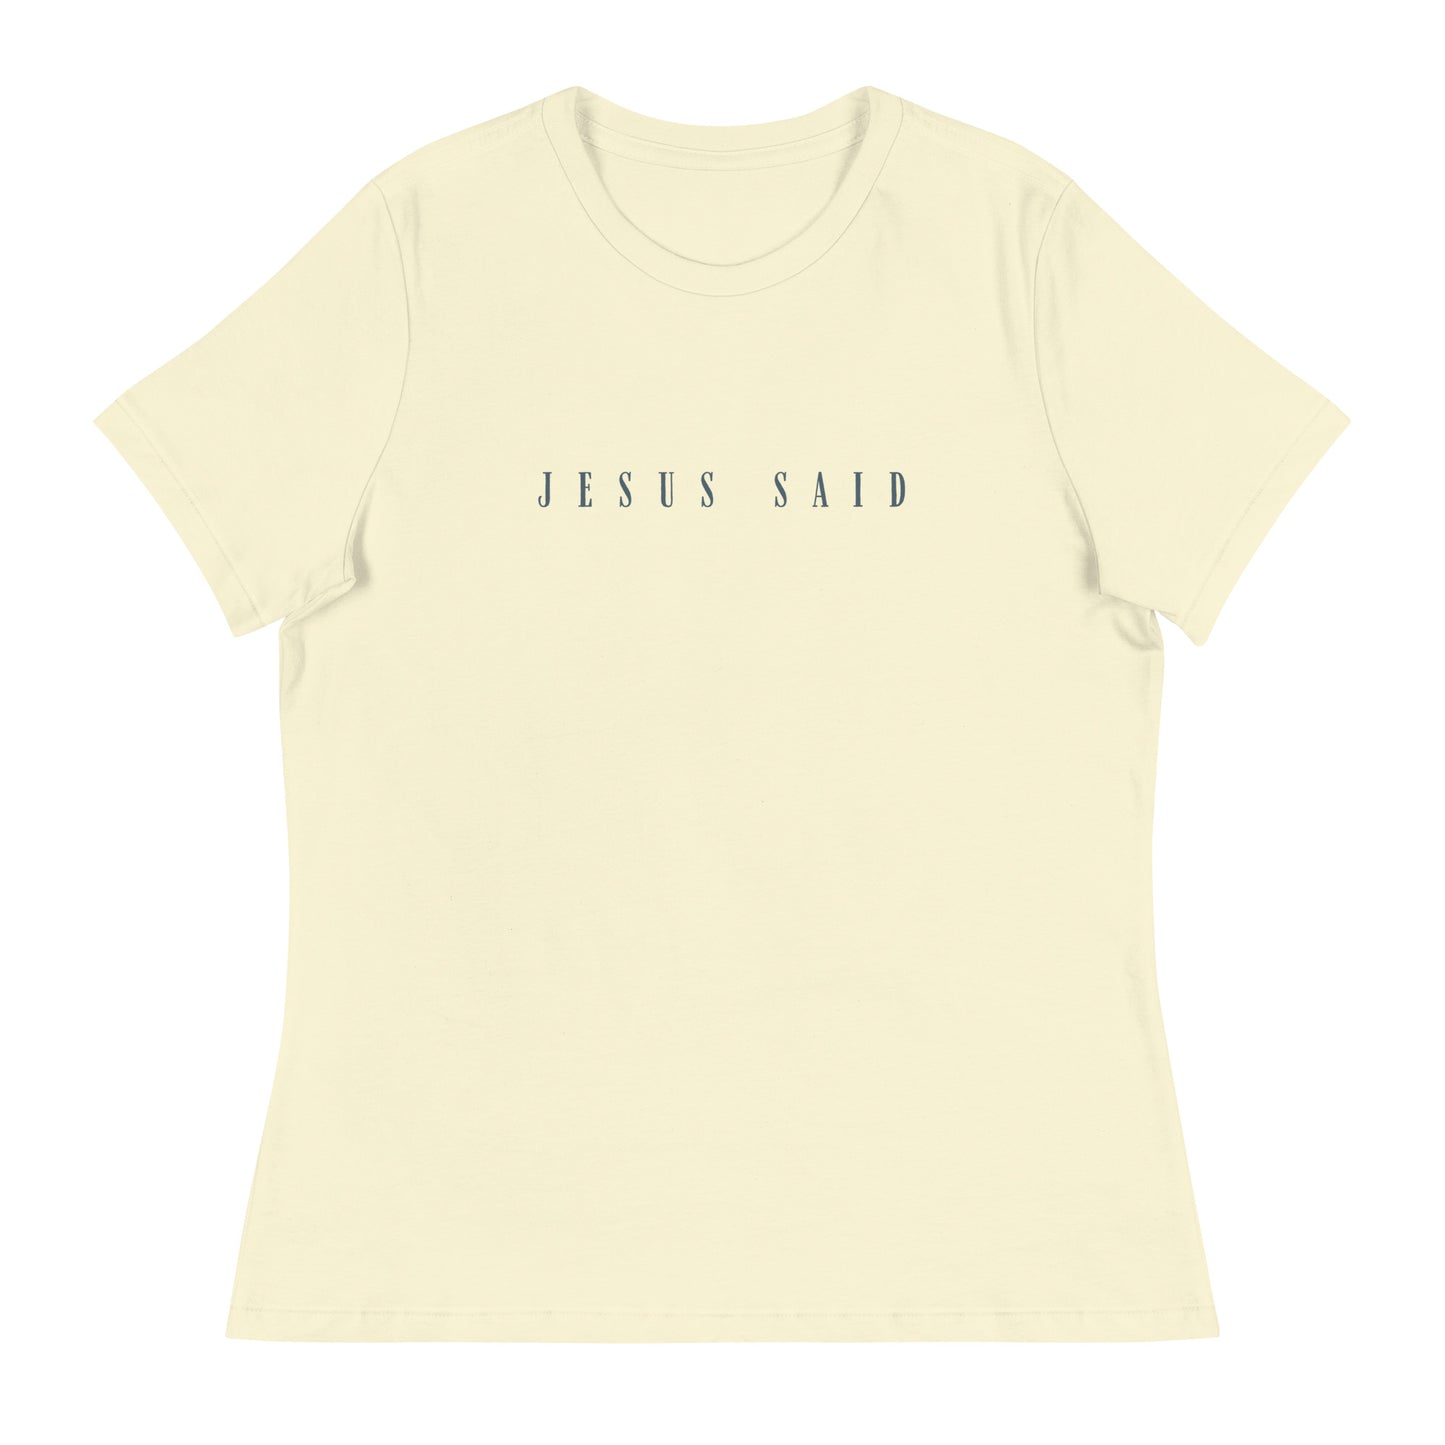 "Jesus Said" Women's Relaxed T-Shirt